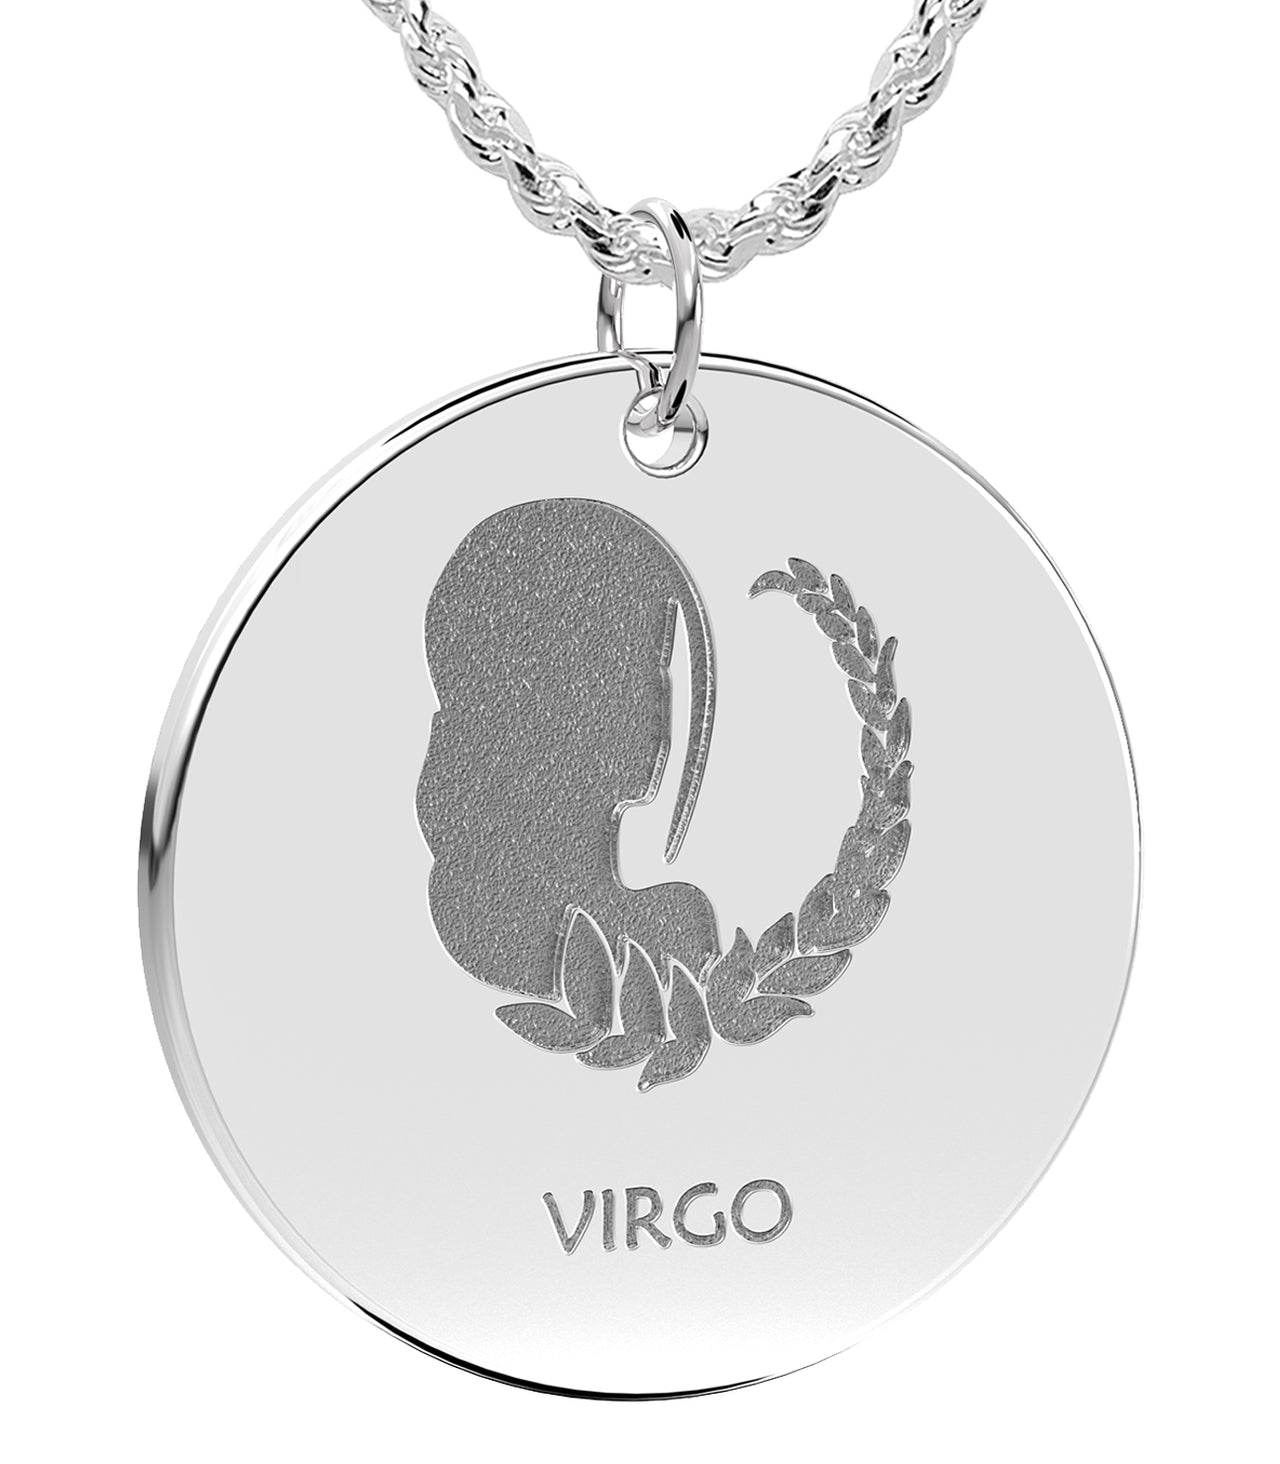 Ladies 925 Sterling Silver 1in Round Virgo Zodiac Polished Pendant Necklace